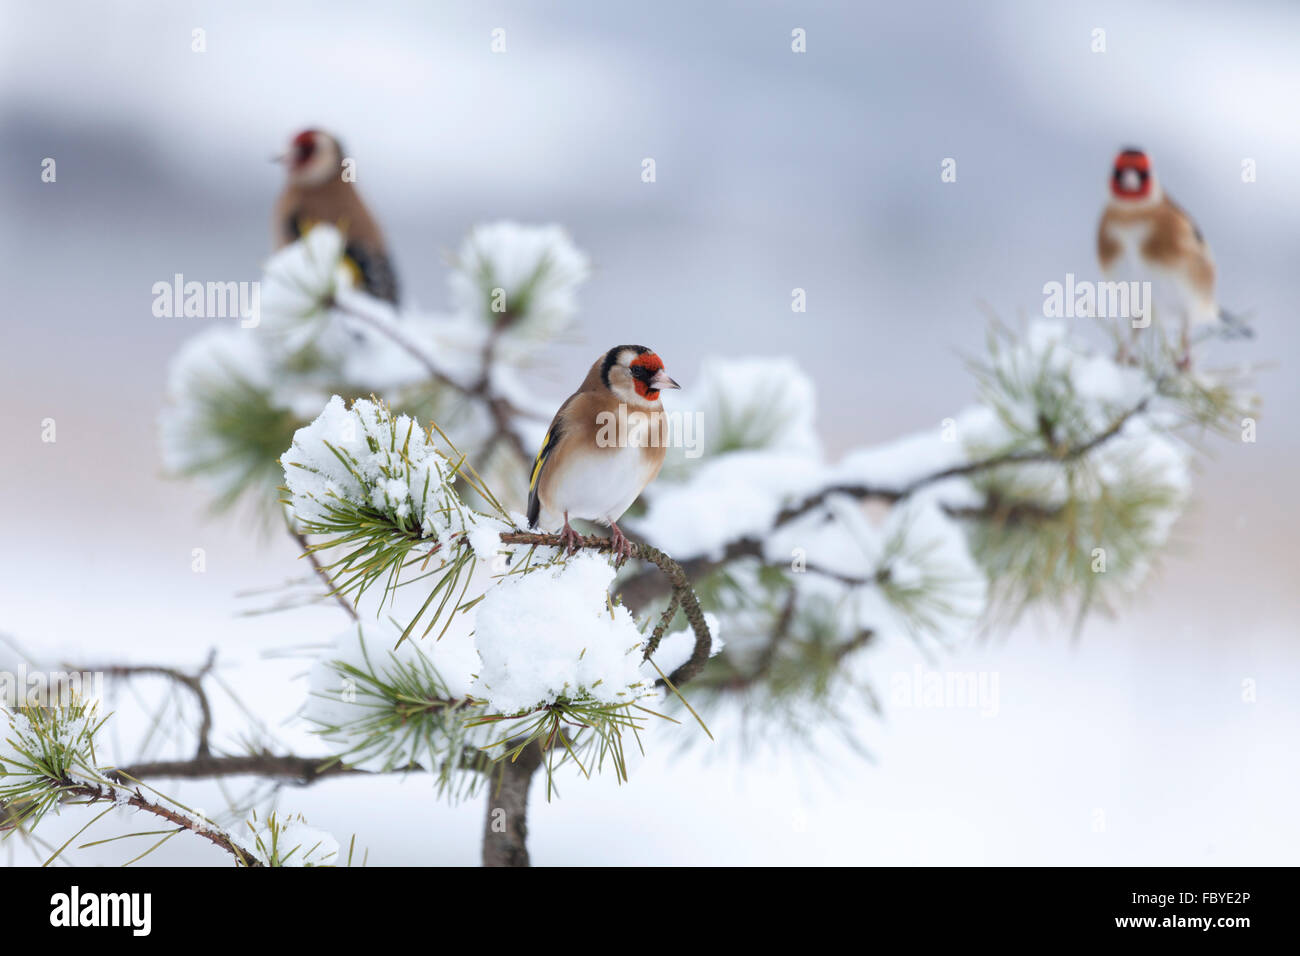 Three European Goldfinches, Carduelis carduelis, perched in a snowy conifer tree with a defocussed wintry background. Scotland Stock Photo